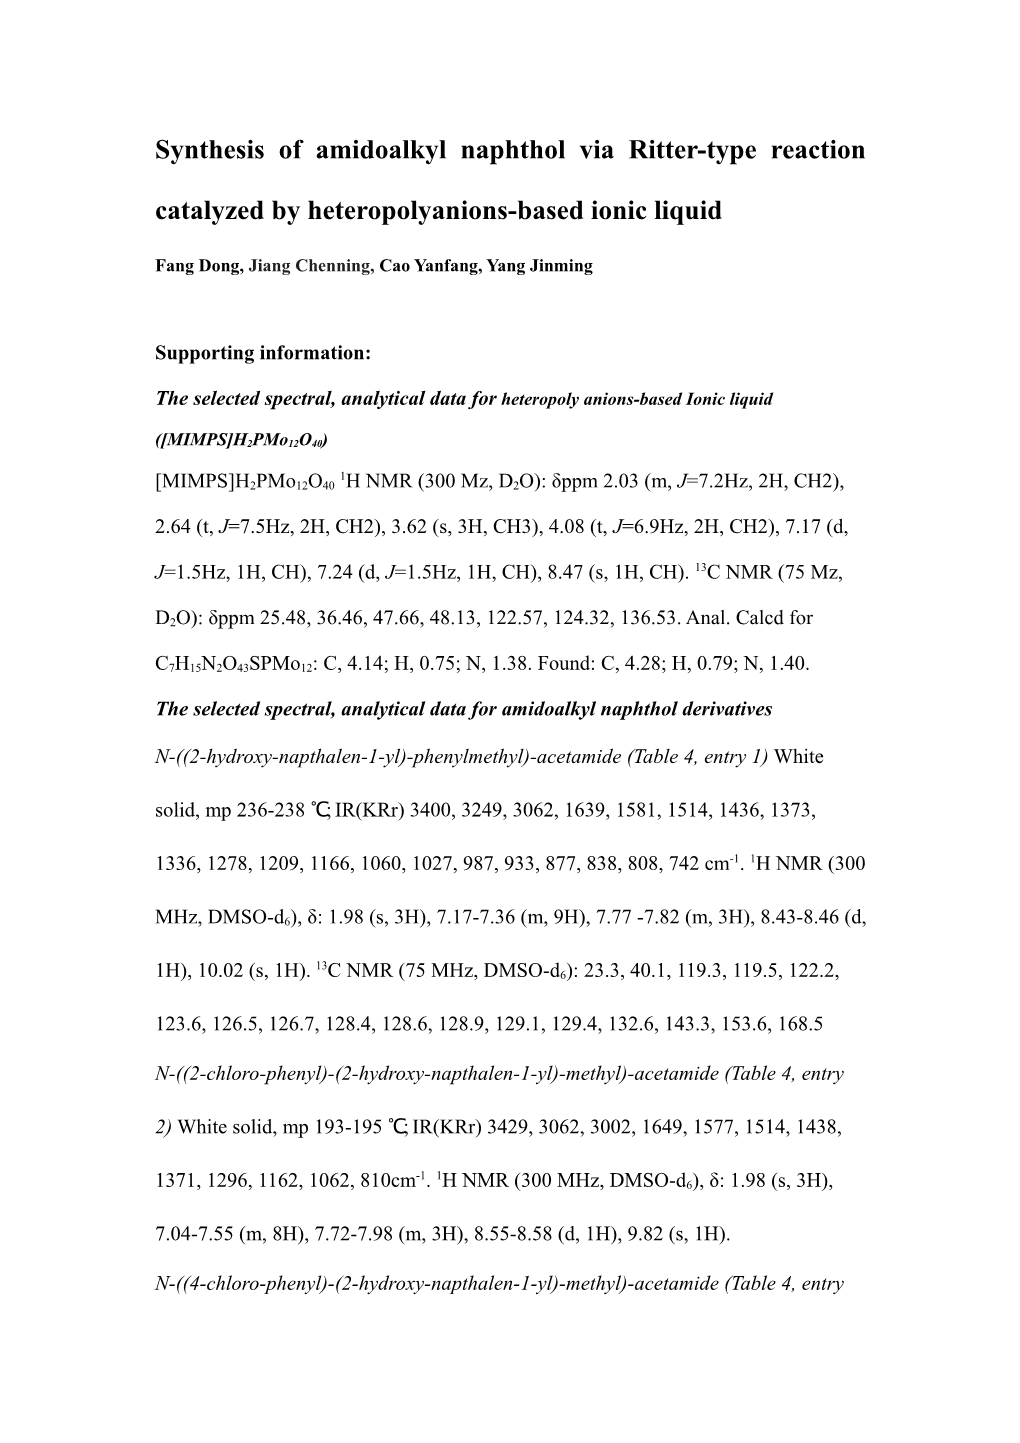 The Selected Spectral Data for Amidoalkyl Naphthol Derivatives